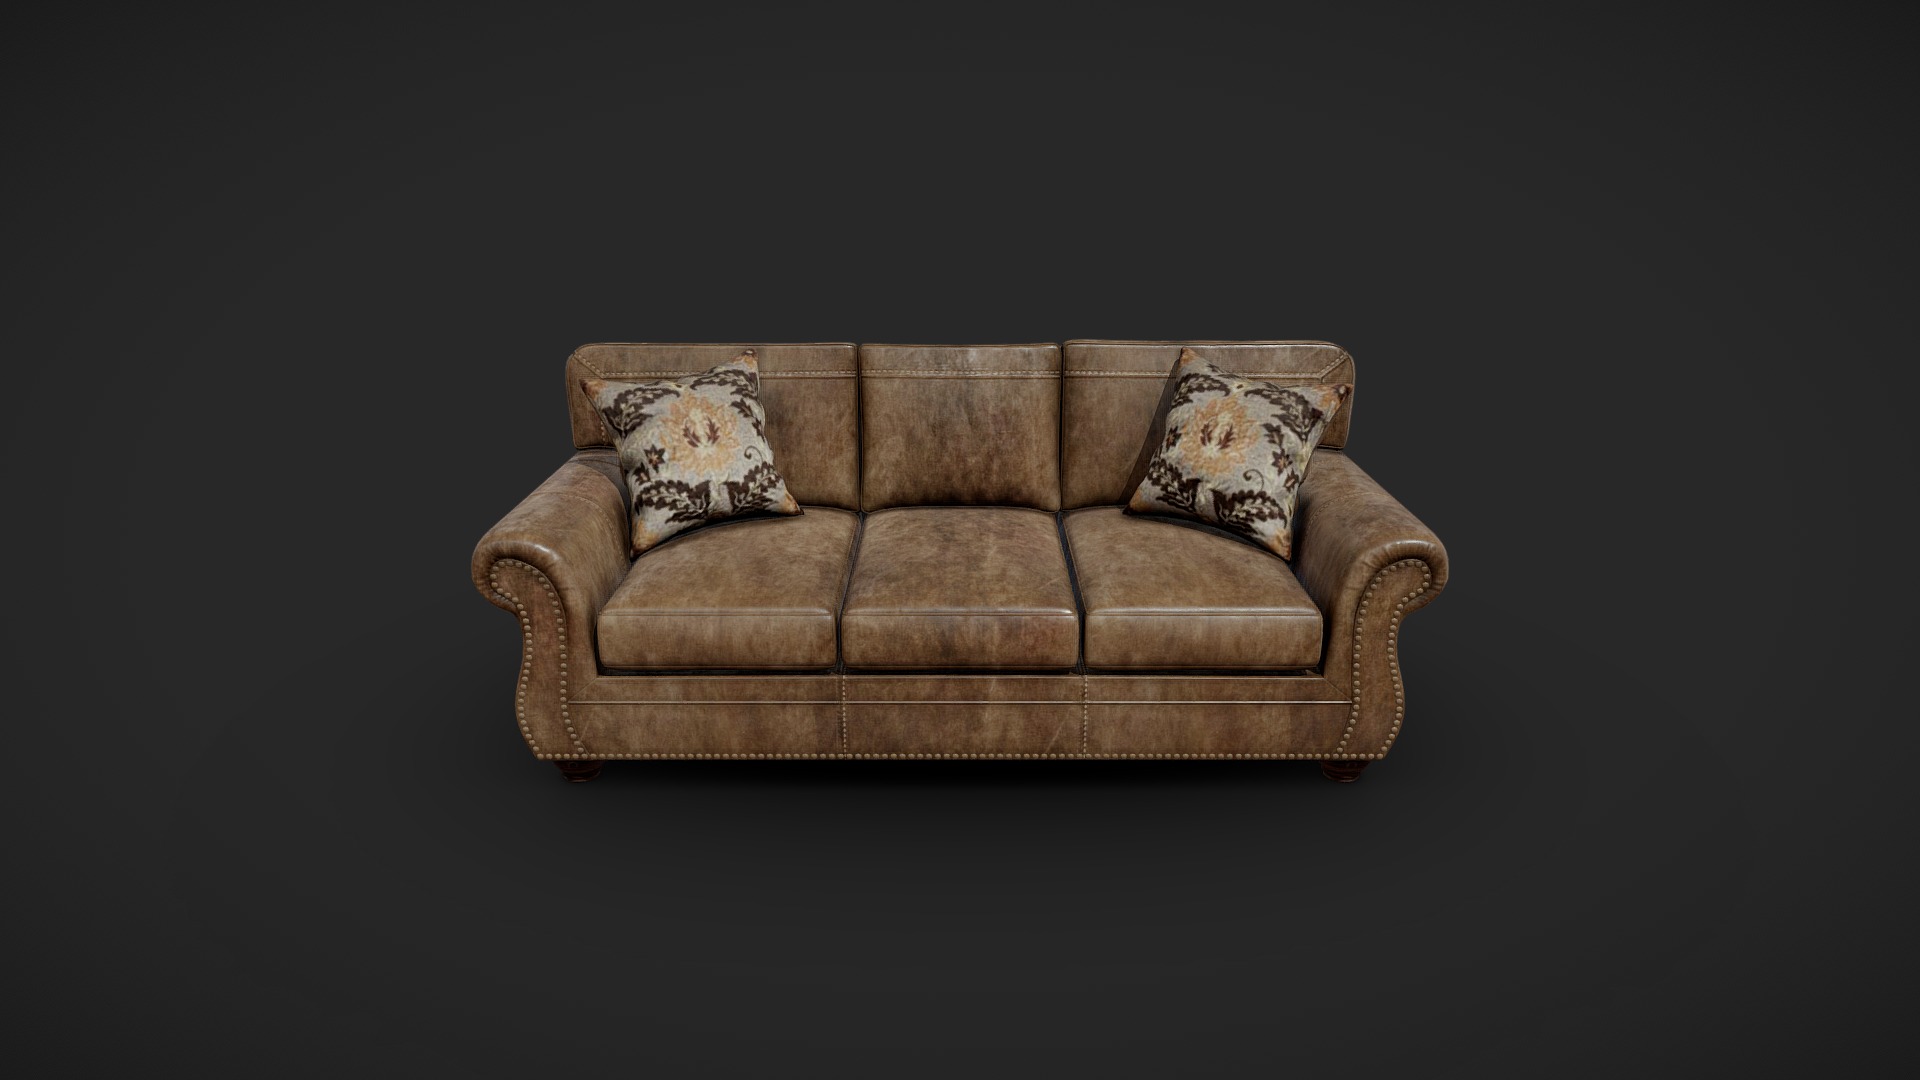 3D model Larkinhurst sofa - This is a 3D model of the Larkinhurst sofa. The 3D model is about a couch with pillows.